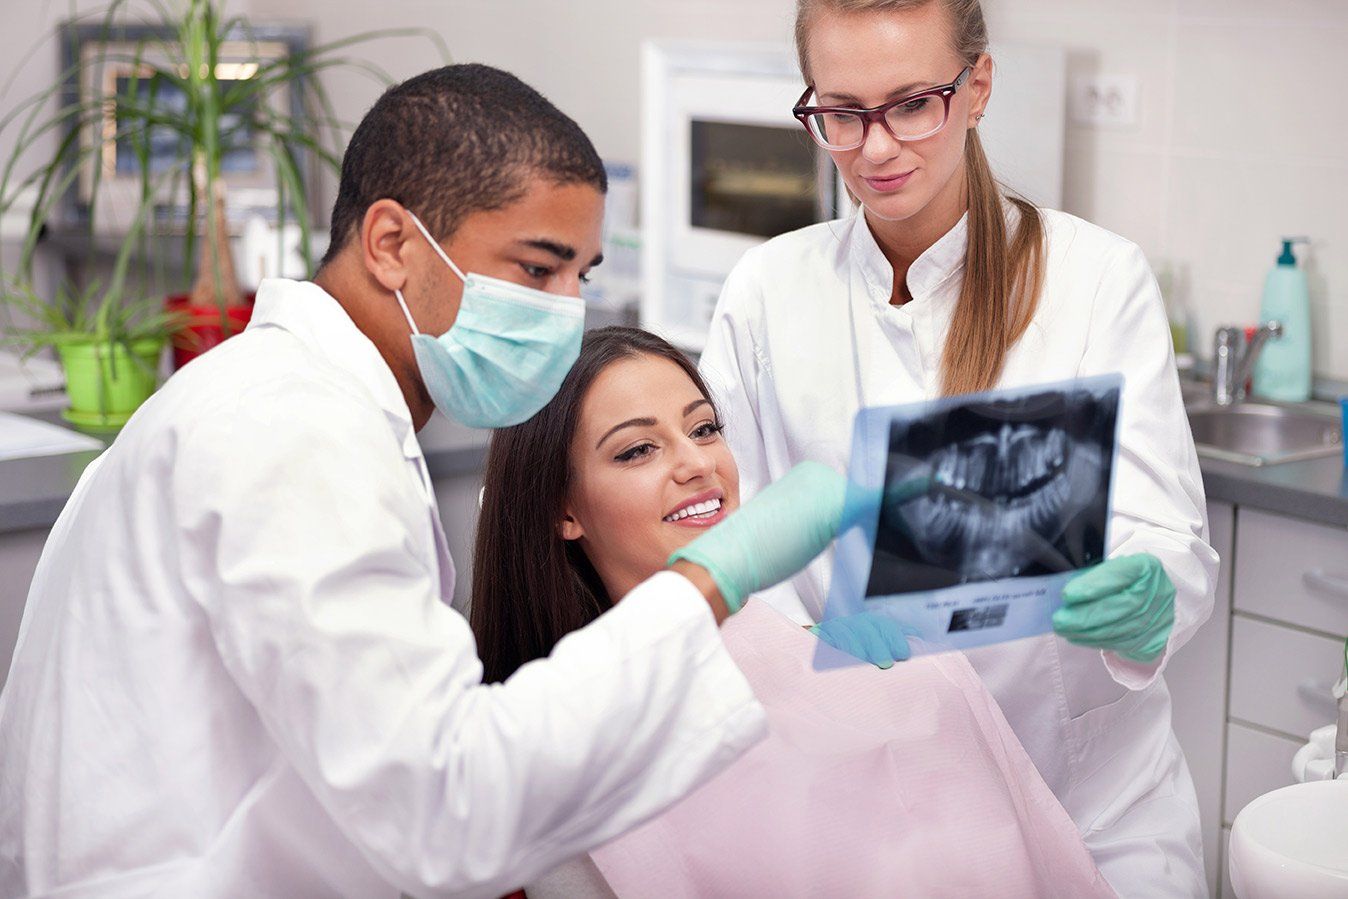 A woman is sitting in a dental chair while two dentists look at an x-ray of her teeth.